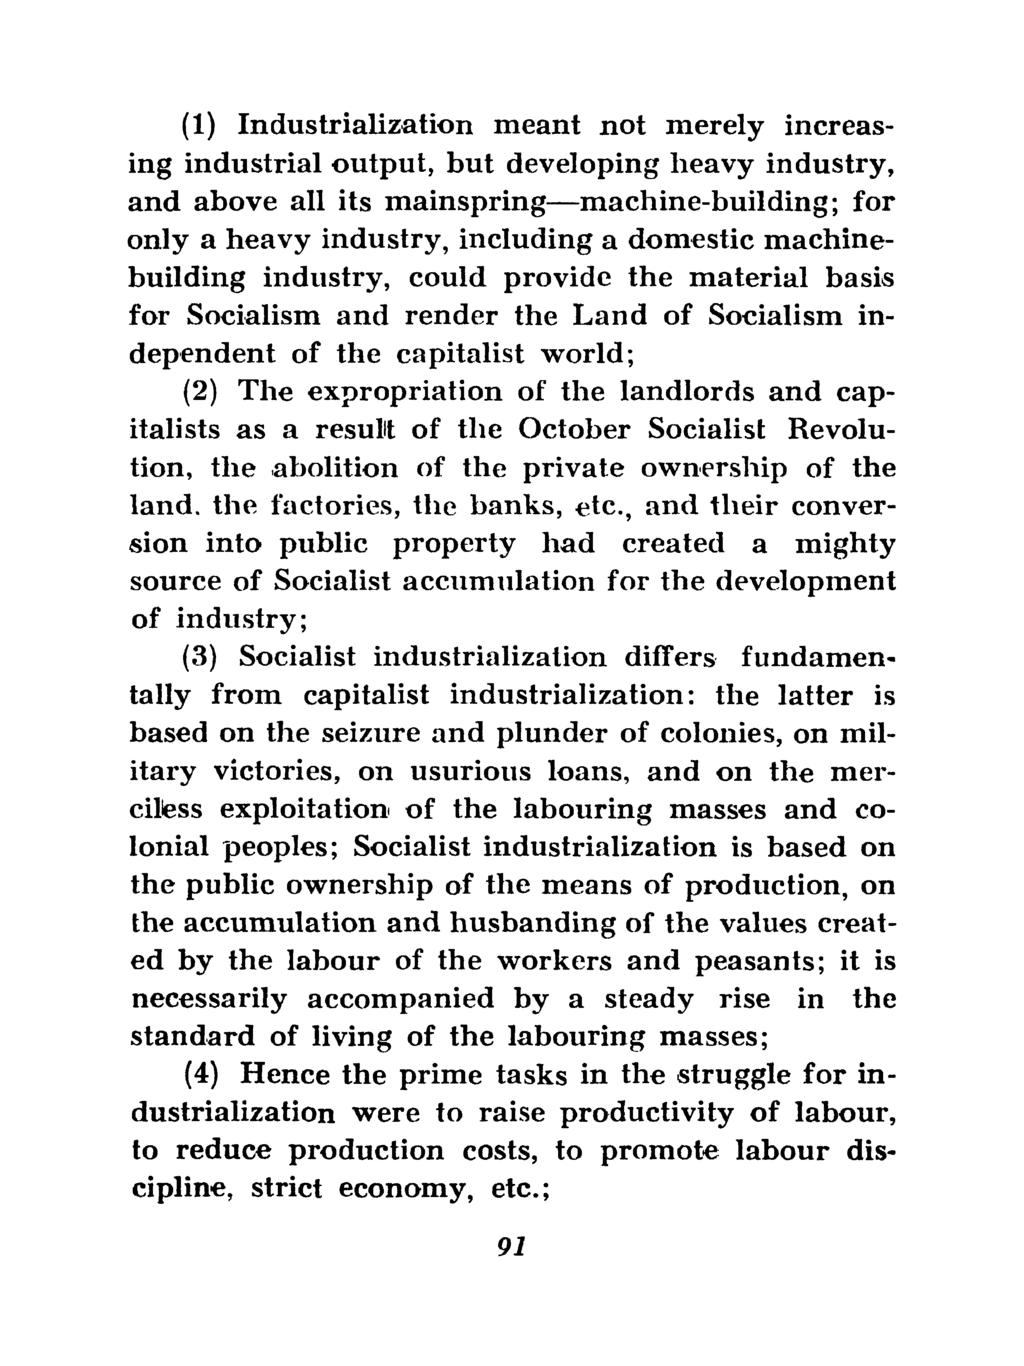 (1) Industrialization meant not merely increasing industrial output, but developing heavy industry, and above all its mainspring machine-building; for only a heavy industry, including a domestic